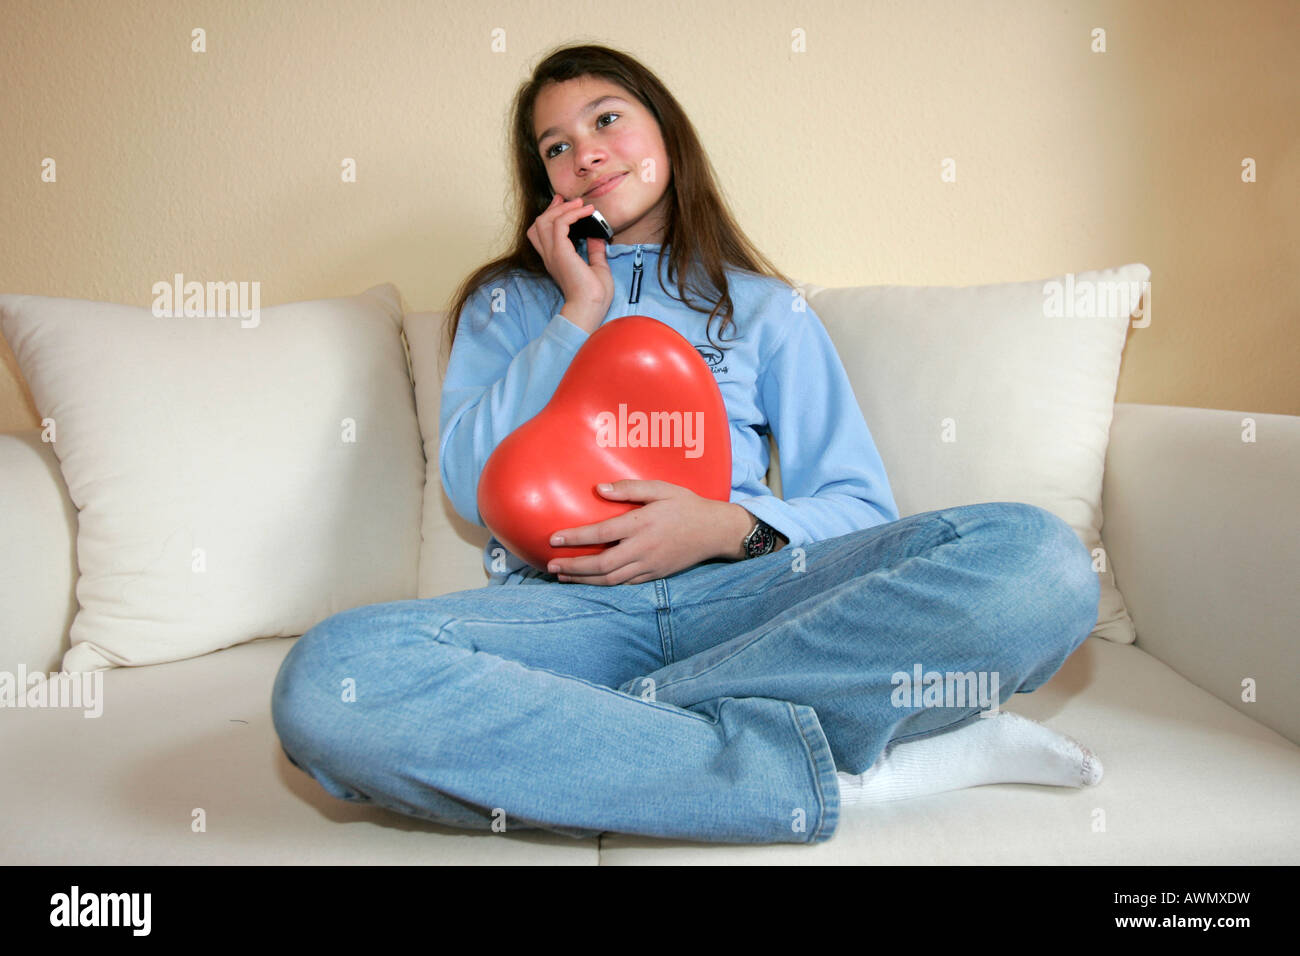 Teenager talking on a mobile phone, Hesse, Germany, Europe Stock Photo